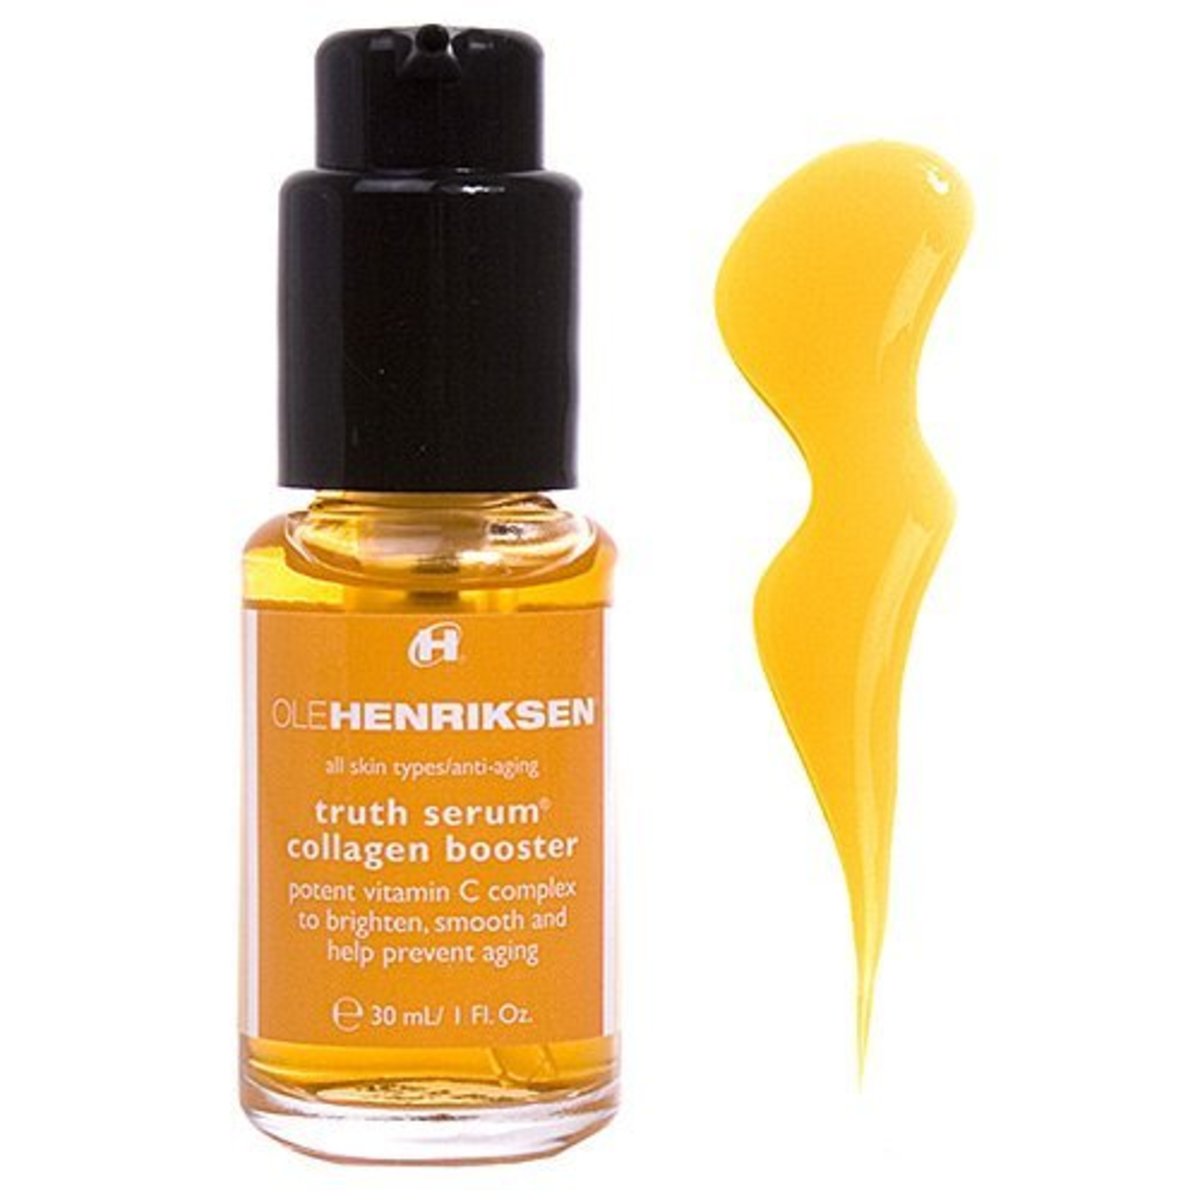 A high-potency vitamin C complex skin creme that prevents and corrects signs of aging while promoting brightness.